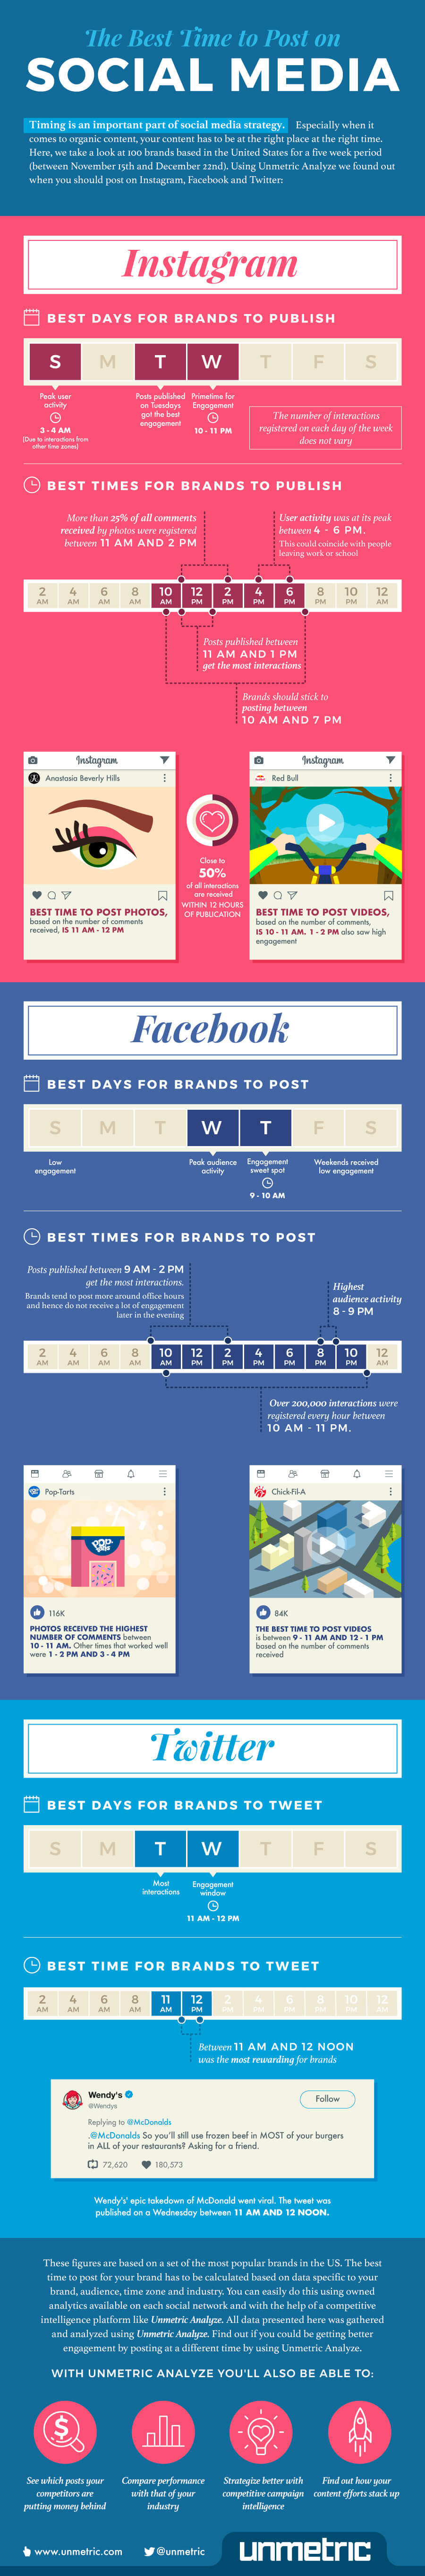 Infographic_best-time-to-post-on-social-media